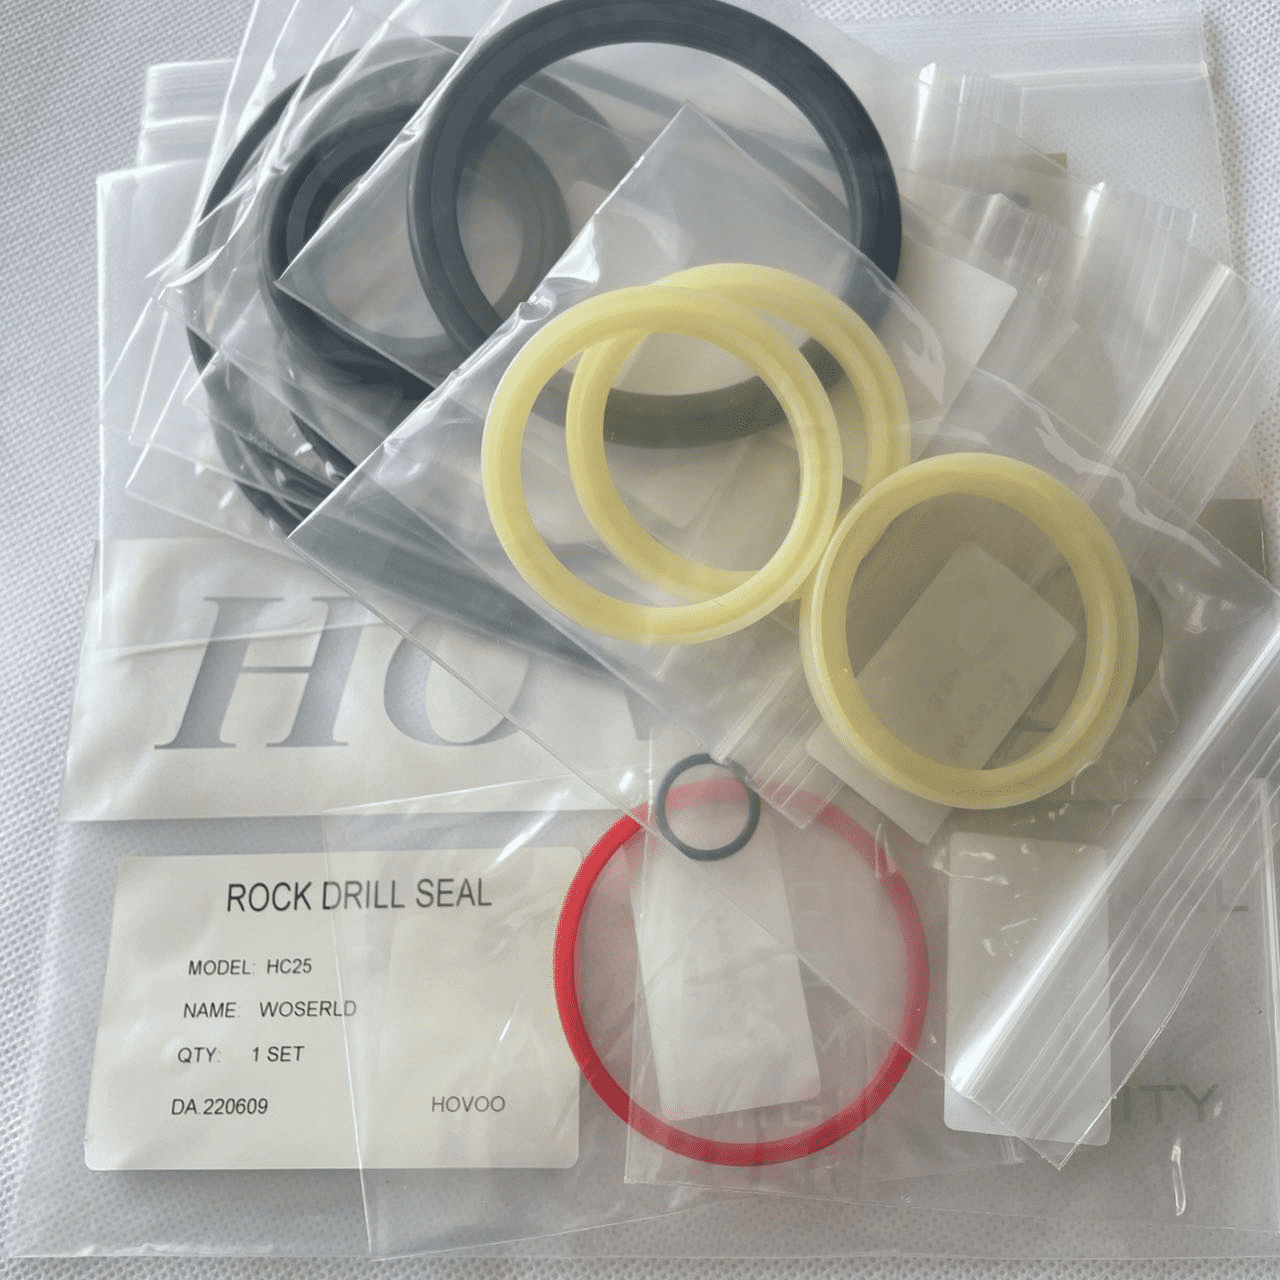 Seal Kits For Rock Drill WOSERLD HC25 (2)